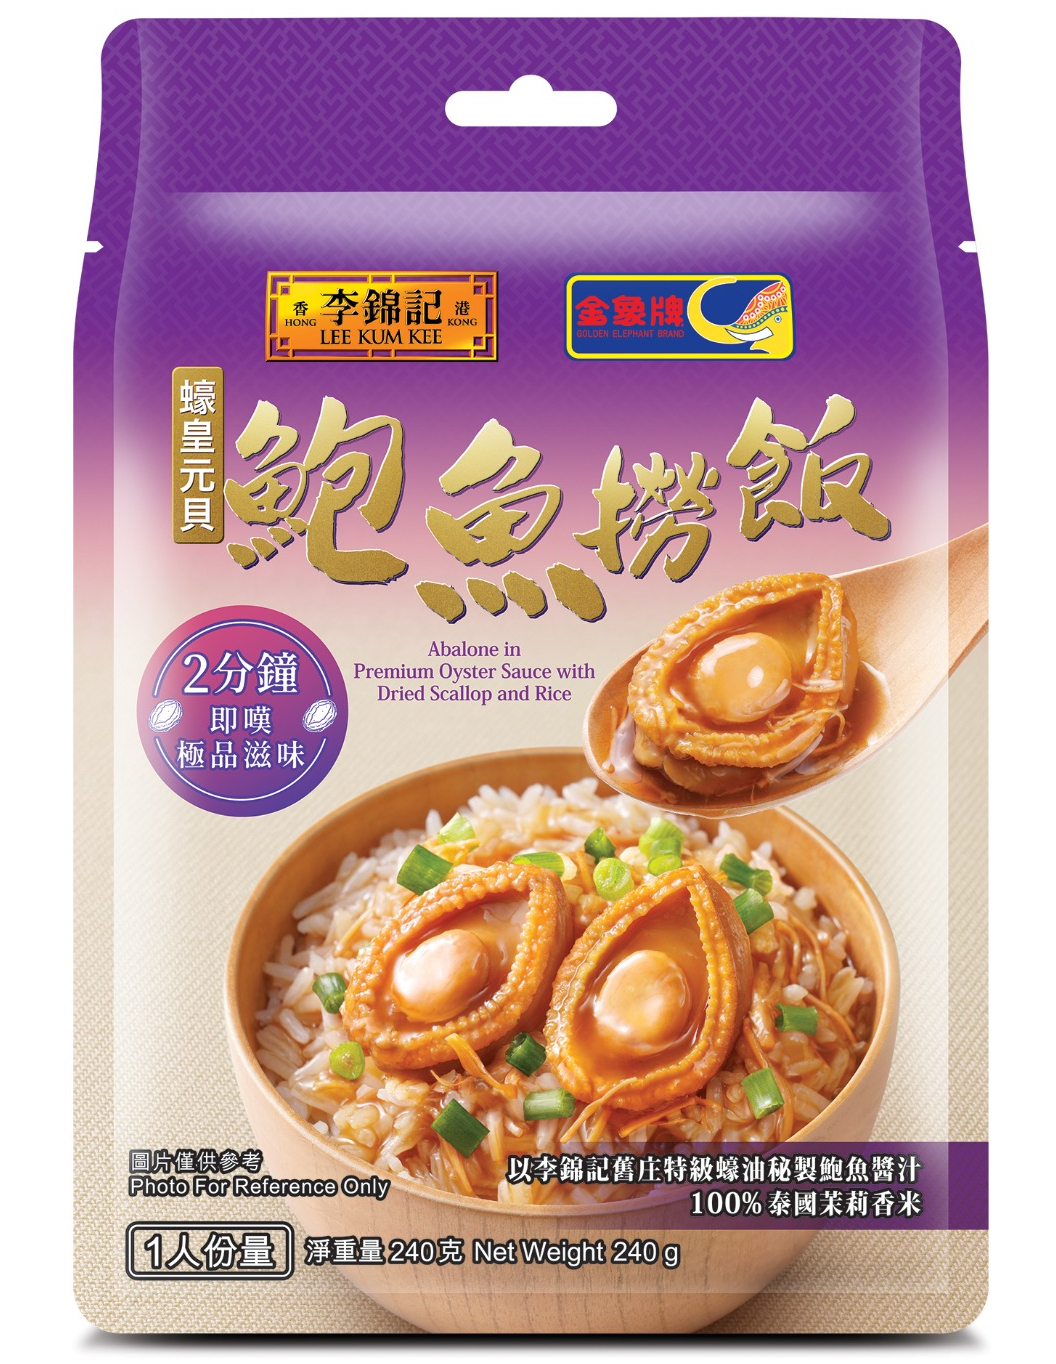 Lee Kum Kee X Golden Elephant Brand Abalone in Premium Oyster Sauce with Dried Scallop and Rice